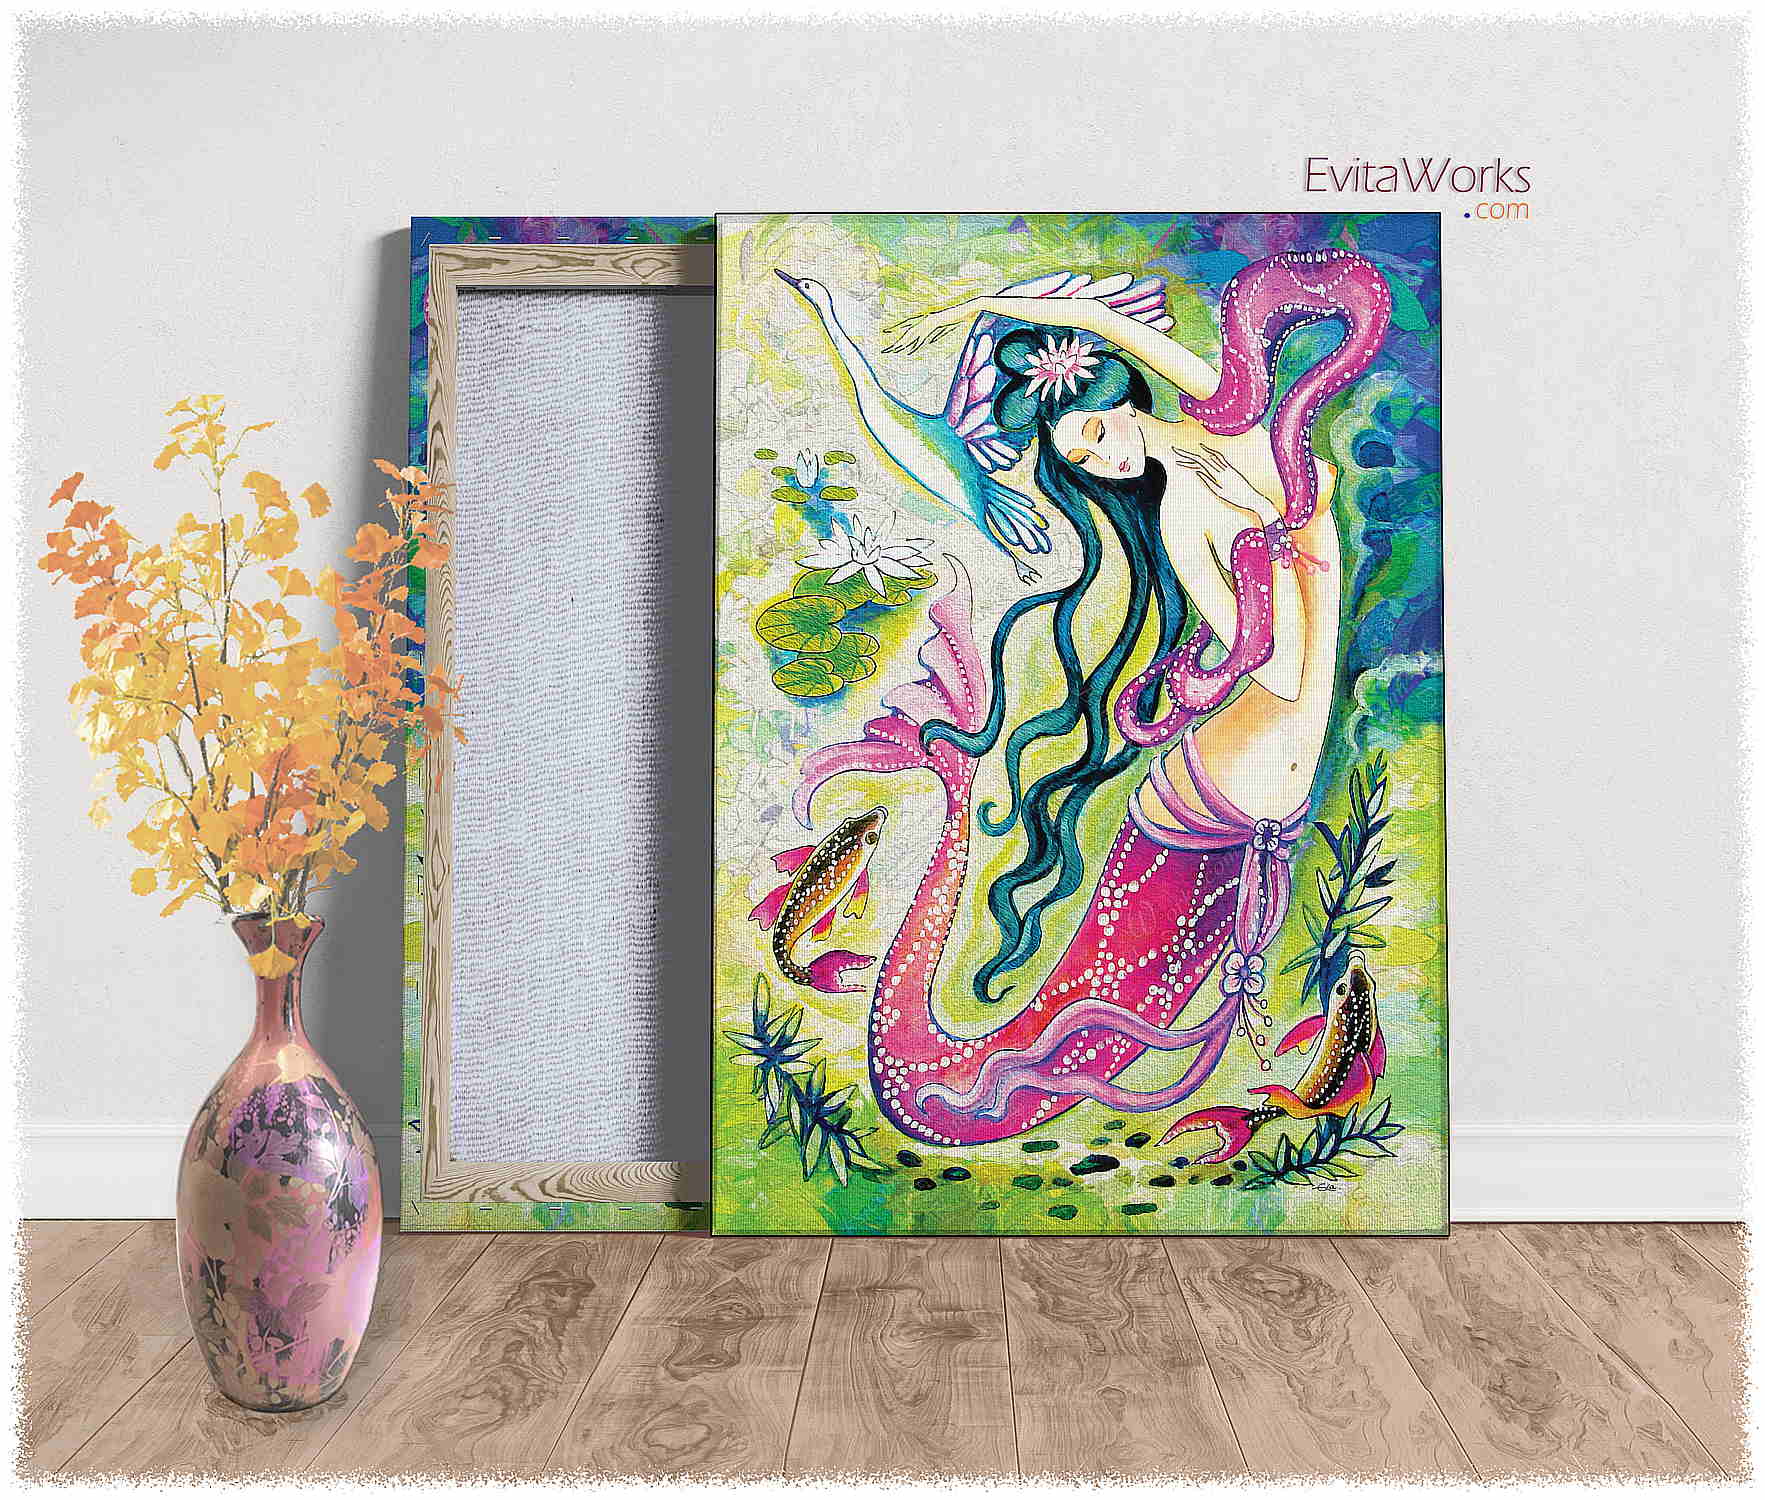 Hit to learn about "Koi Fish Mermaid, beautiful female creature" on canvases